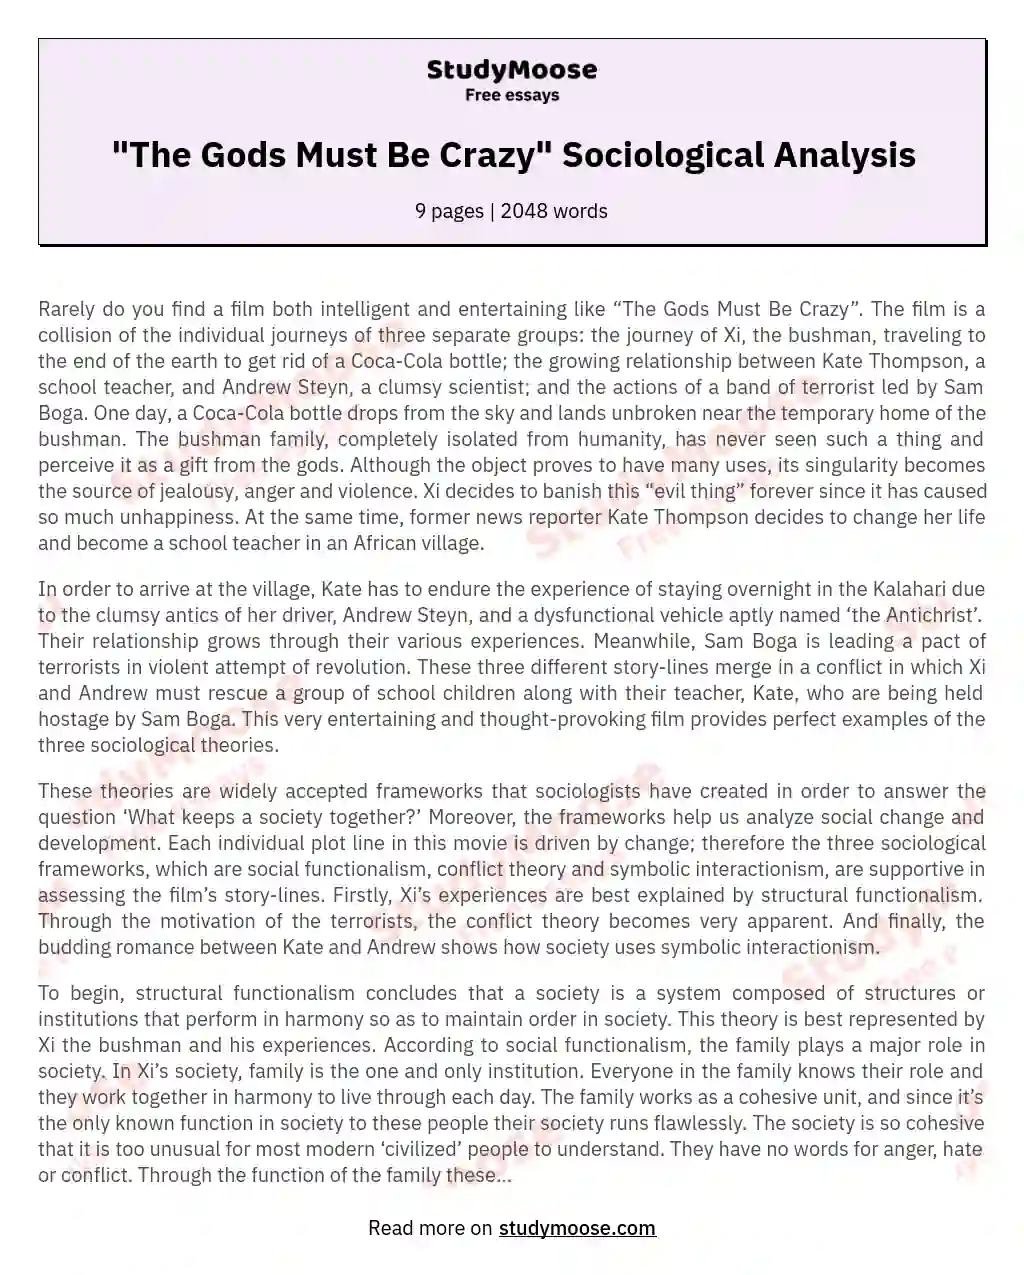 "The Gods Must Be Crazy" Sociological Analysis essay